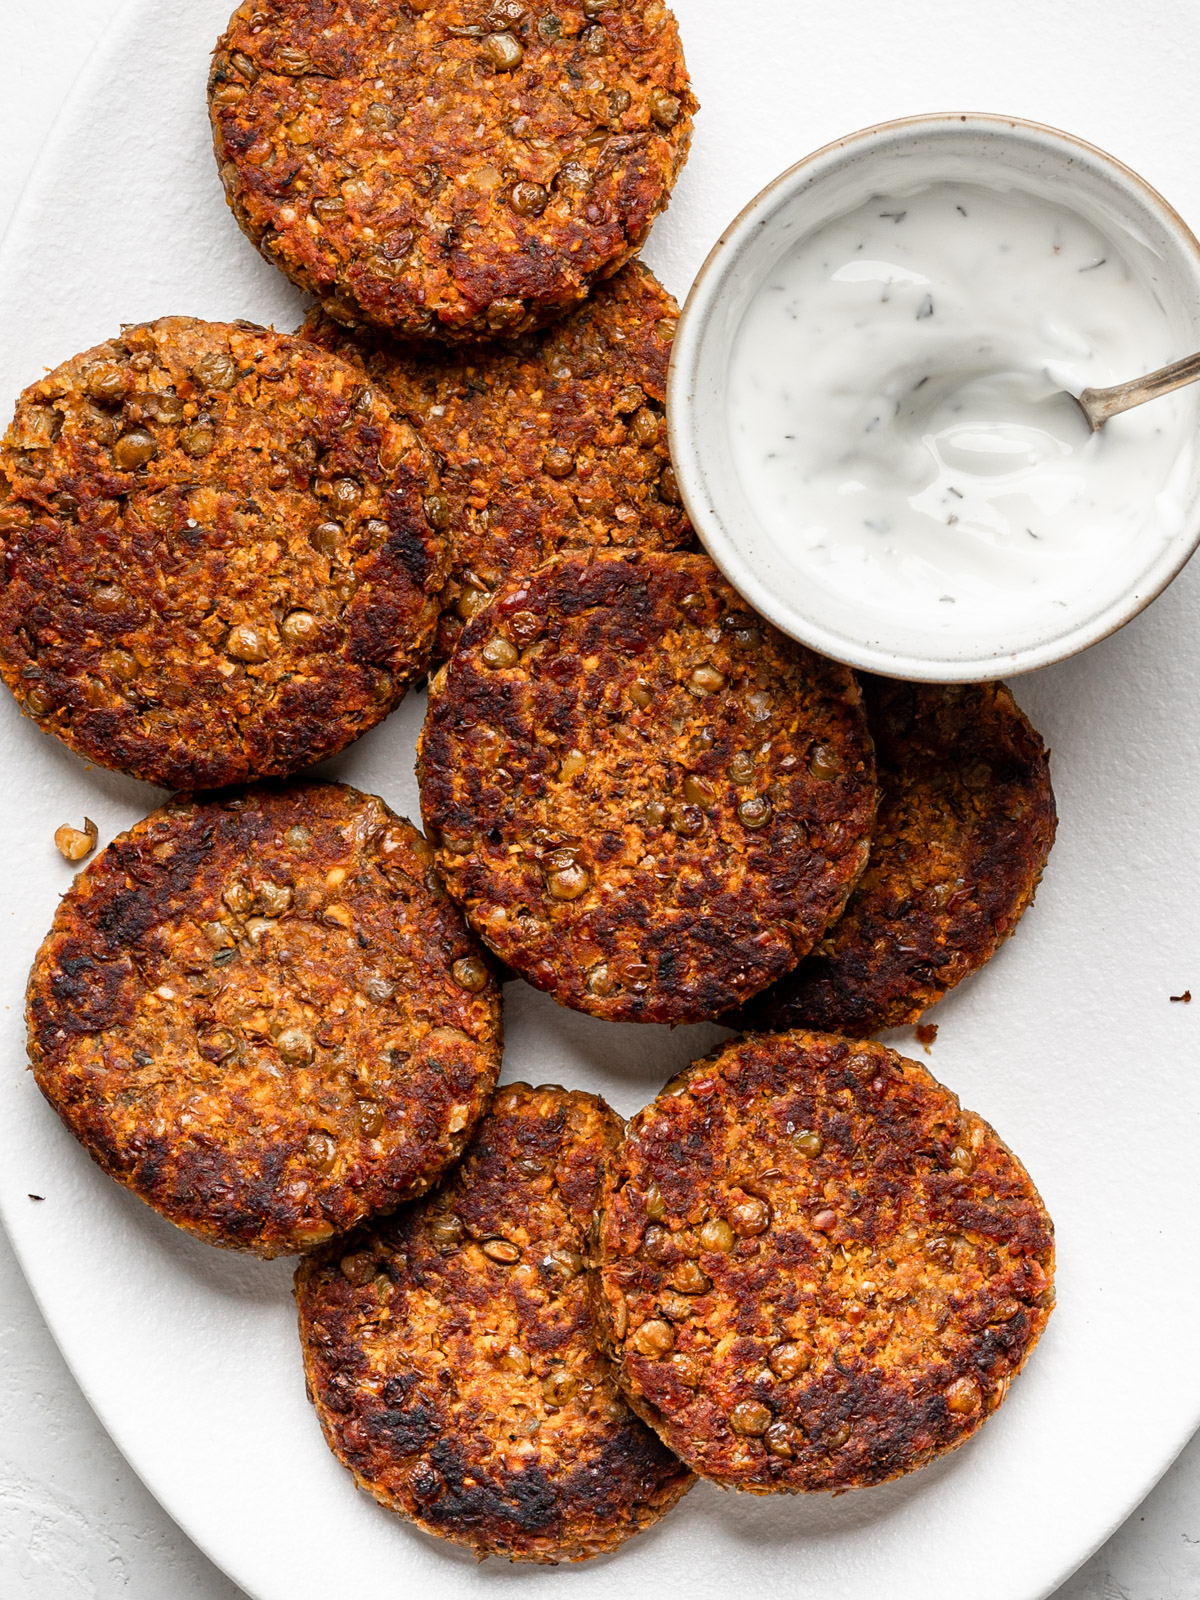 lentil patties on a white platter with yogurt dipping sauce in a small bowl on the side